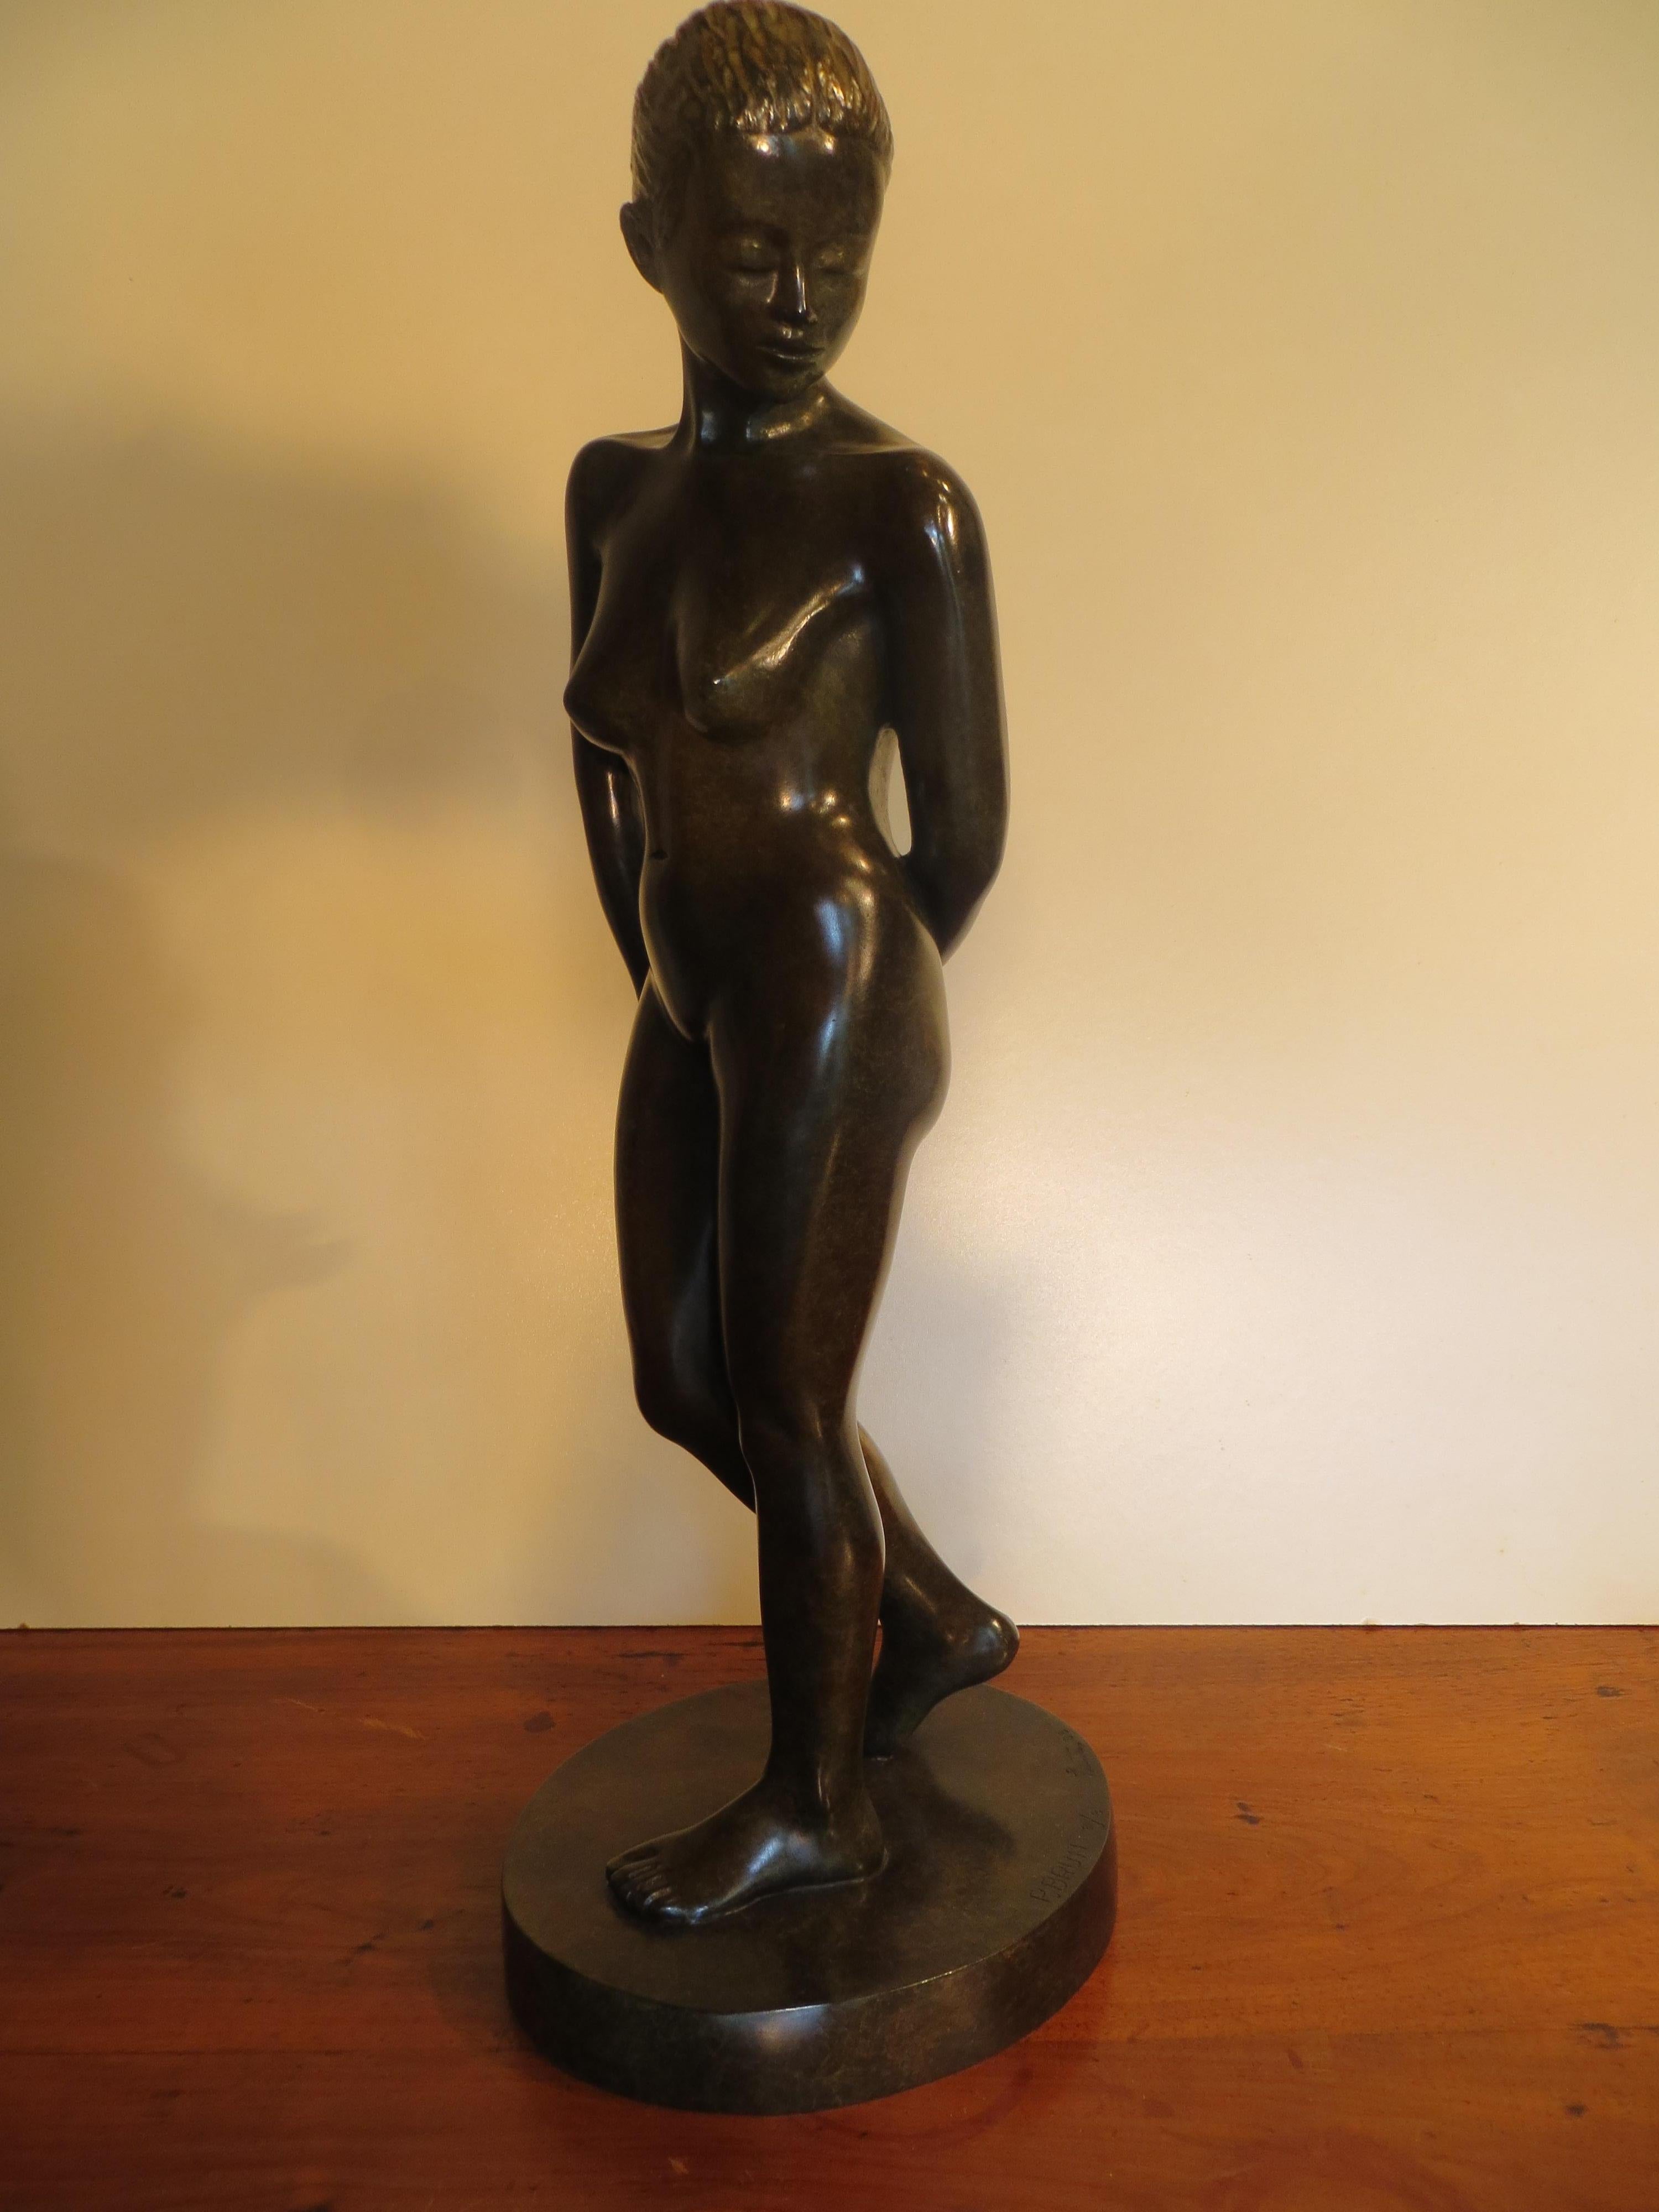 Stand Up Pose - Gold Nude Sculpture by Patrick Brun